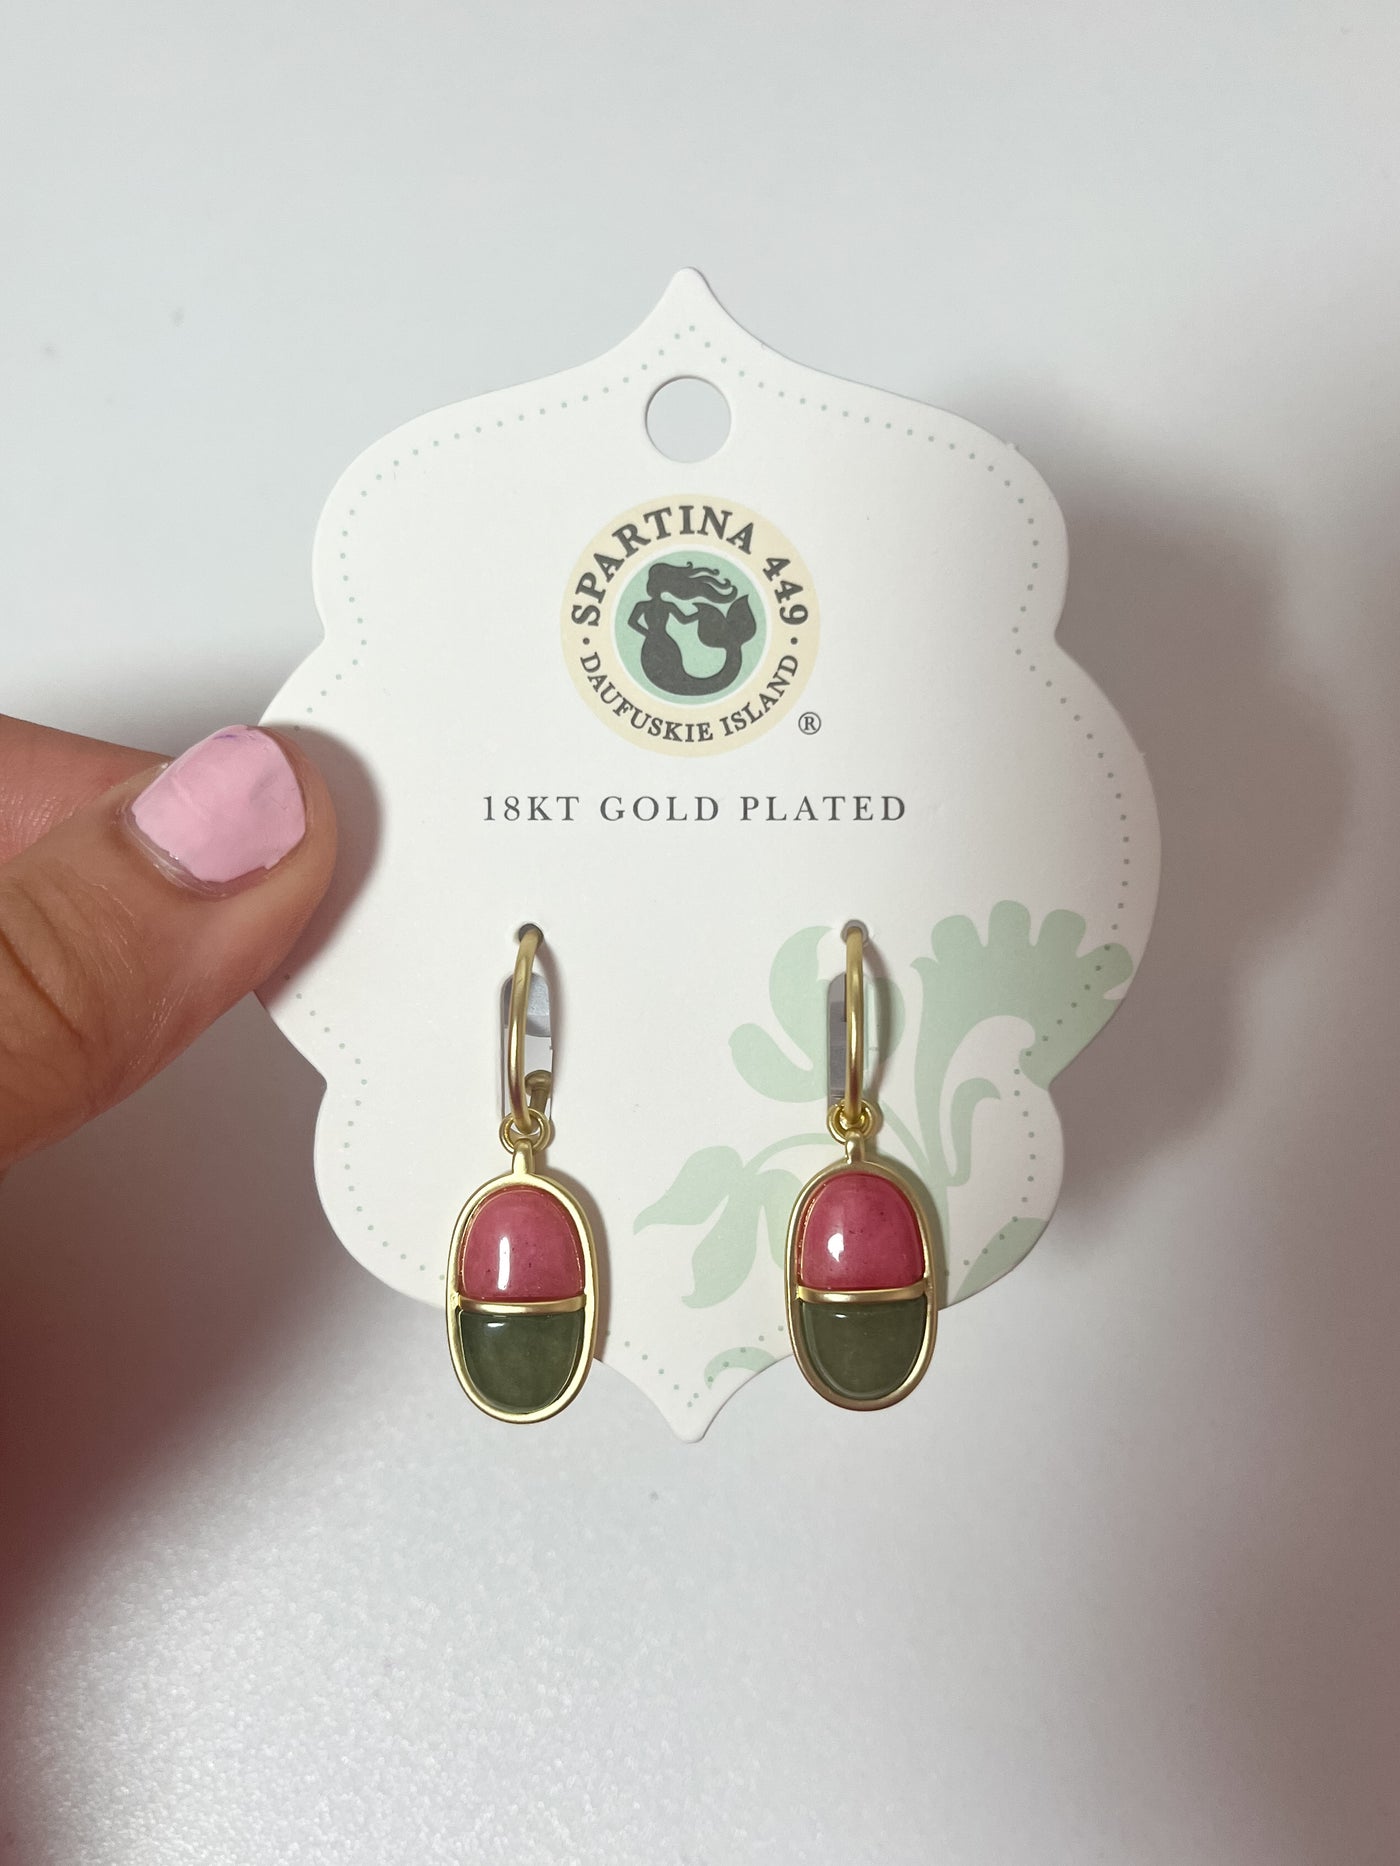 Spartina Twofold Earrings